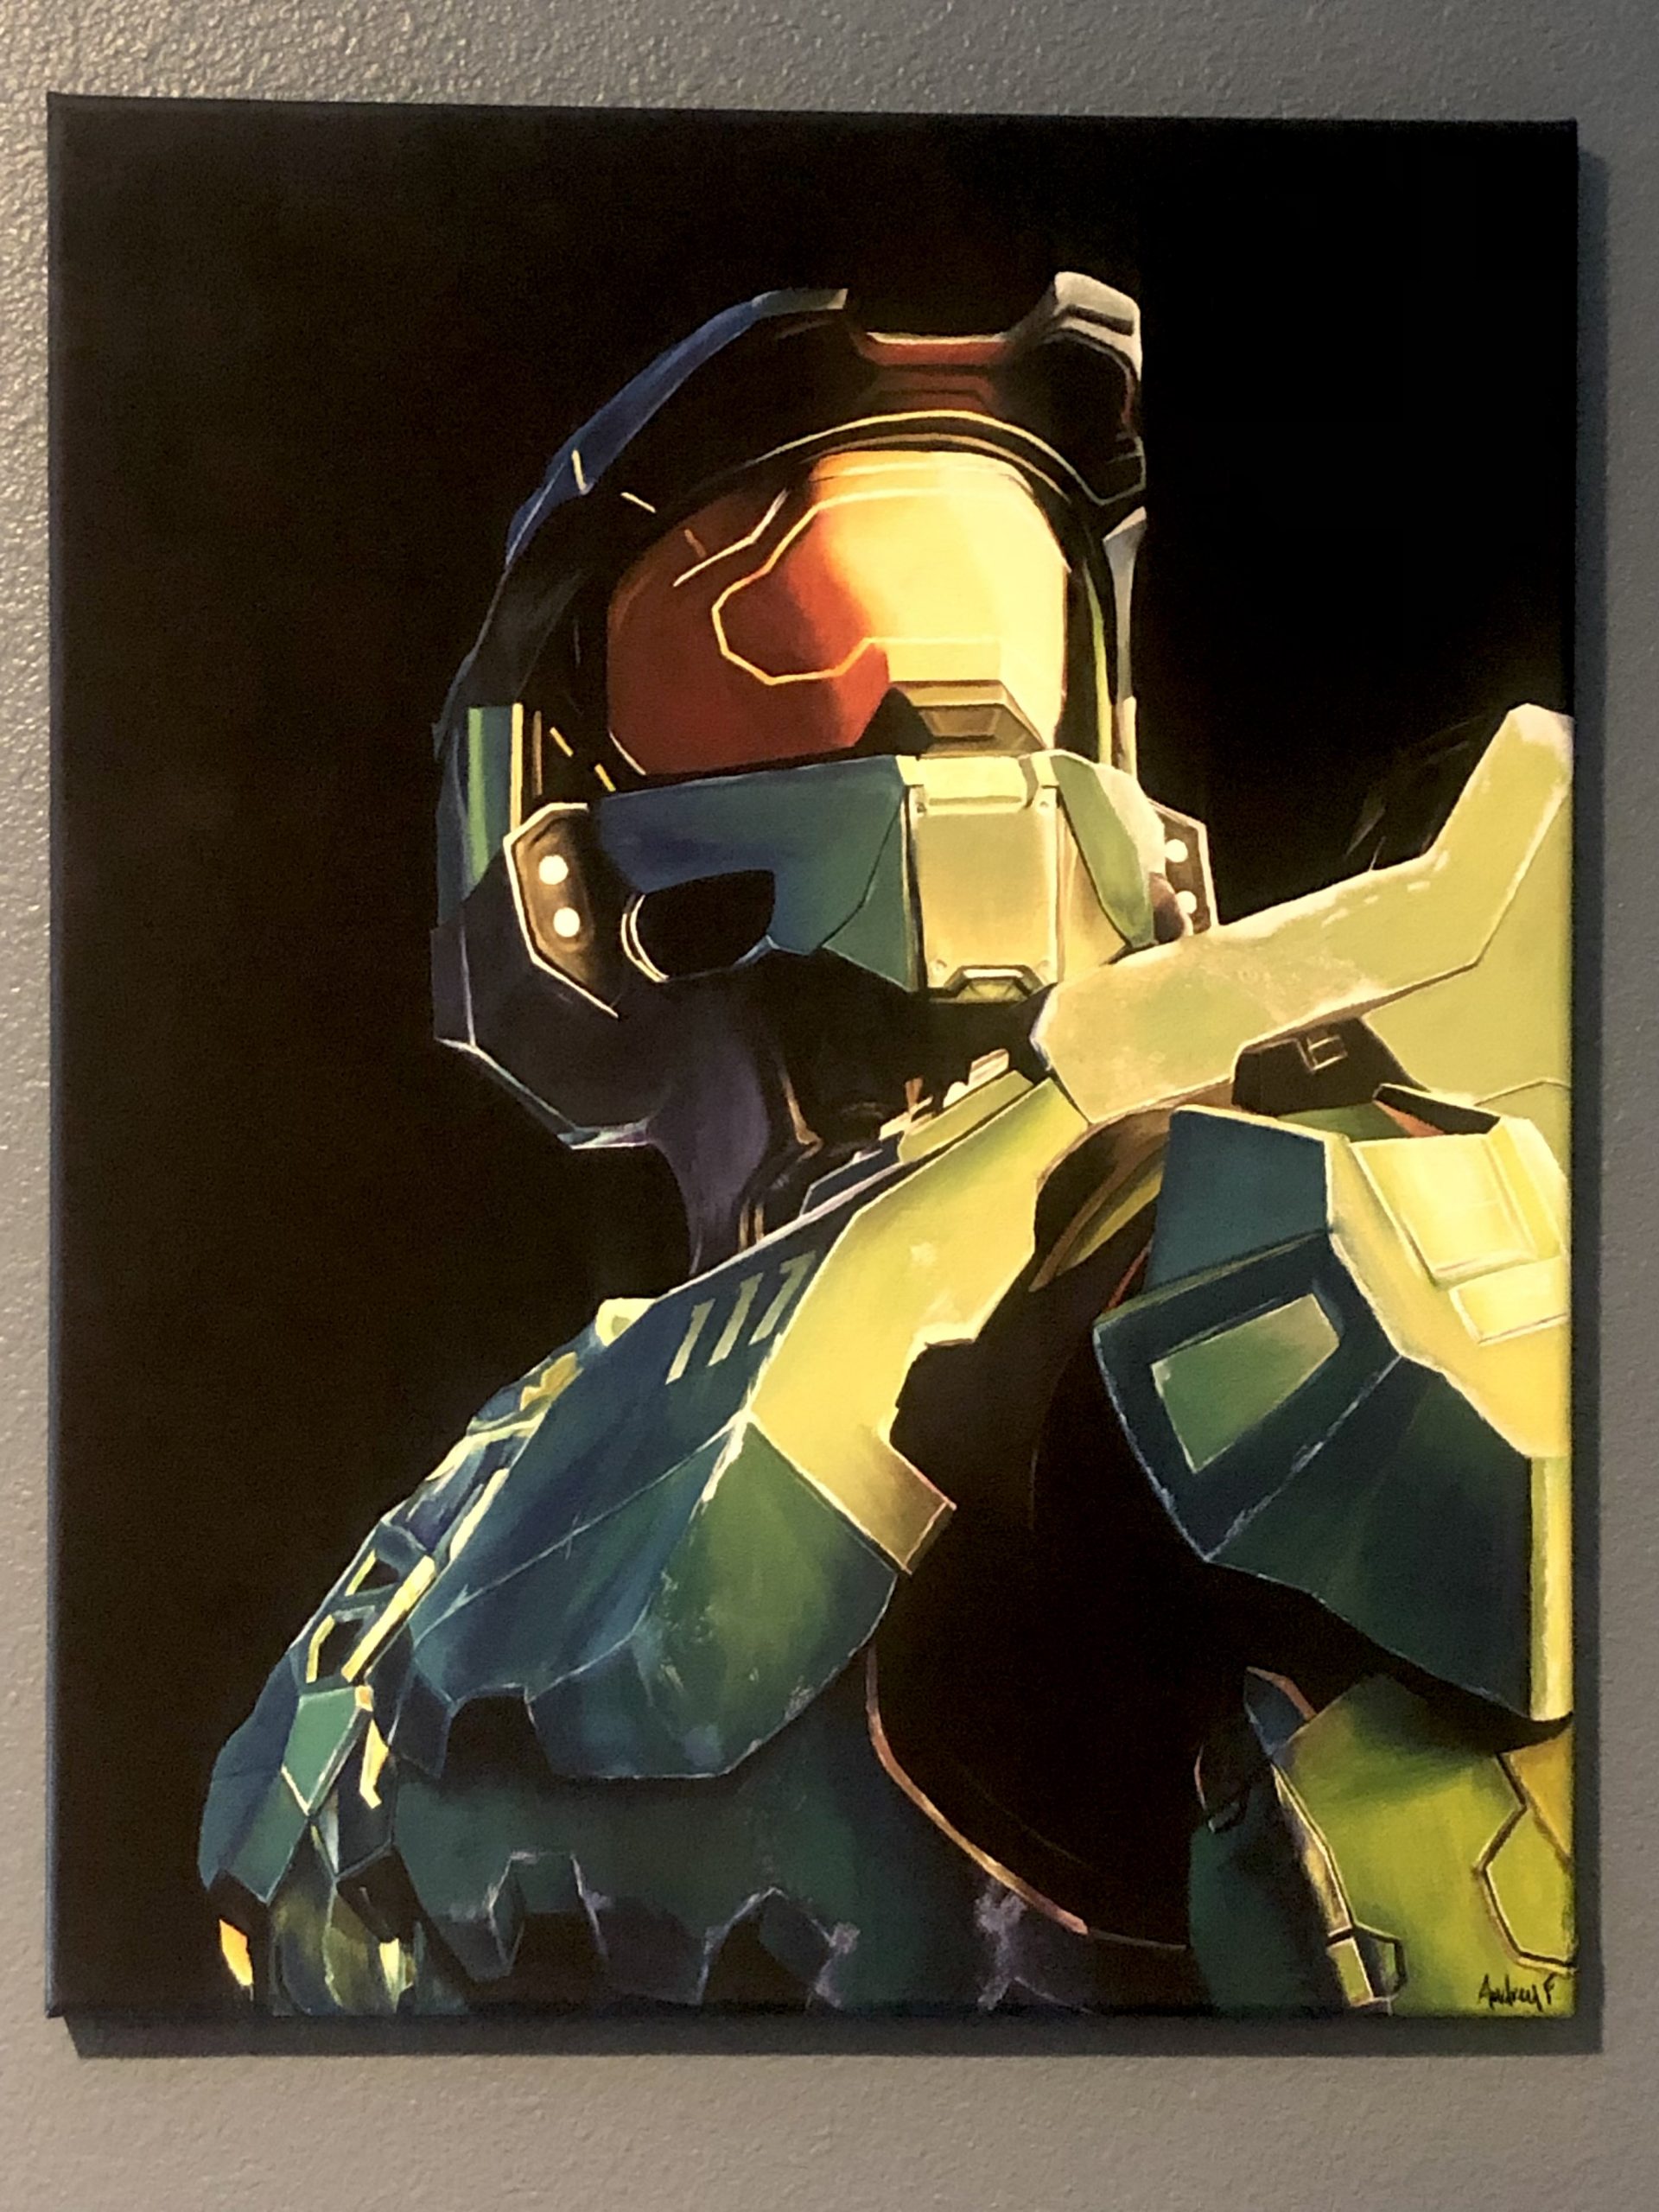 Audrey Fasching Halo Infinite Master Chief Portrait by Audrey Fasching Acrylic Painting